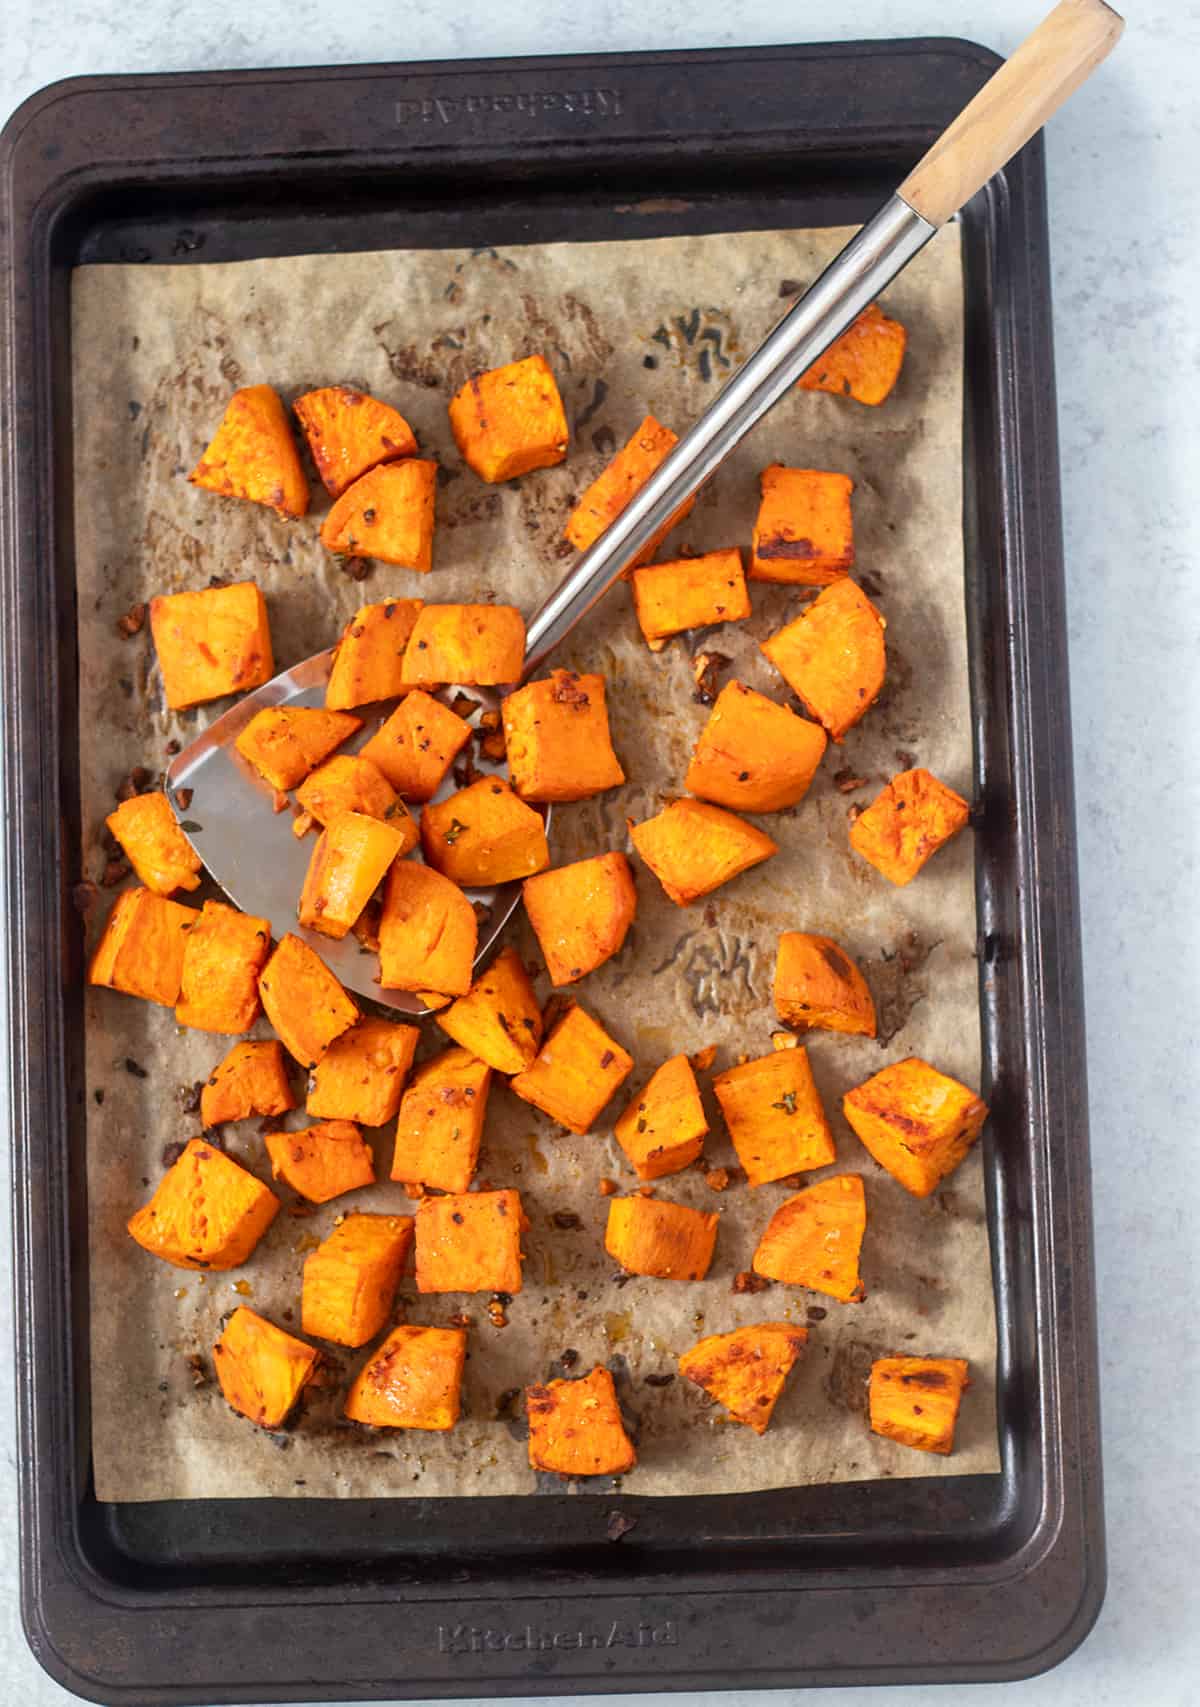 roasted sweet potatoes on baking sheet after being baked